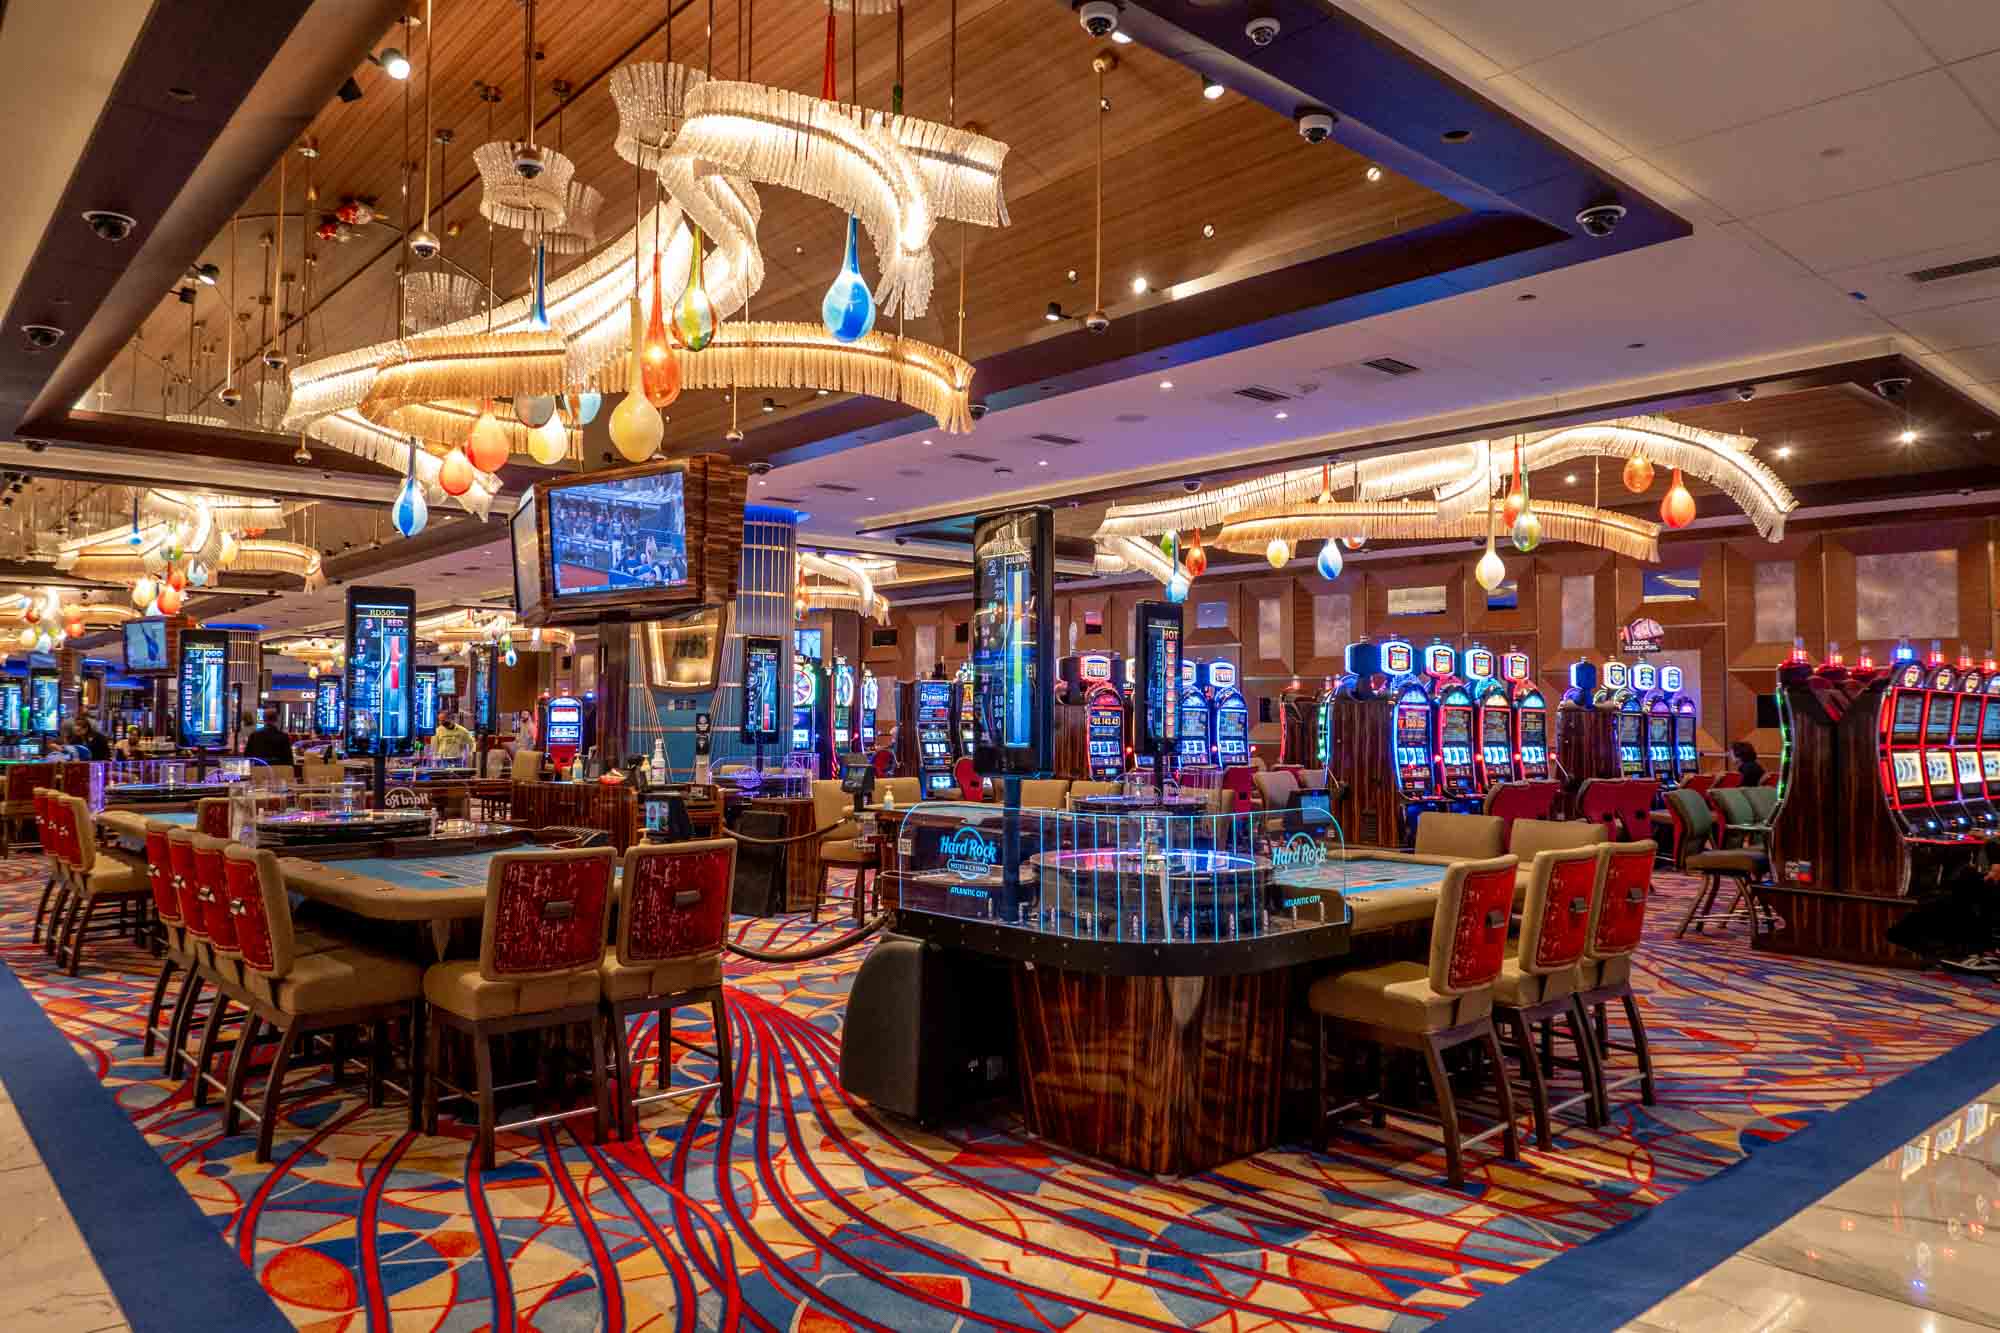 Casino with table games and slot machines.